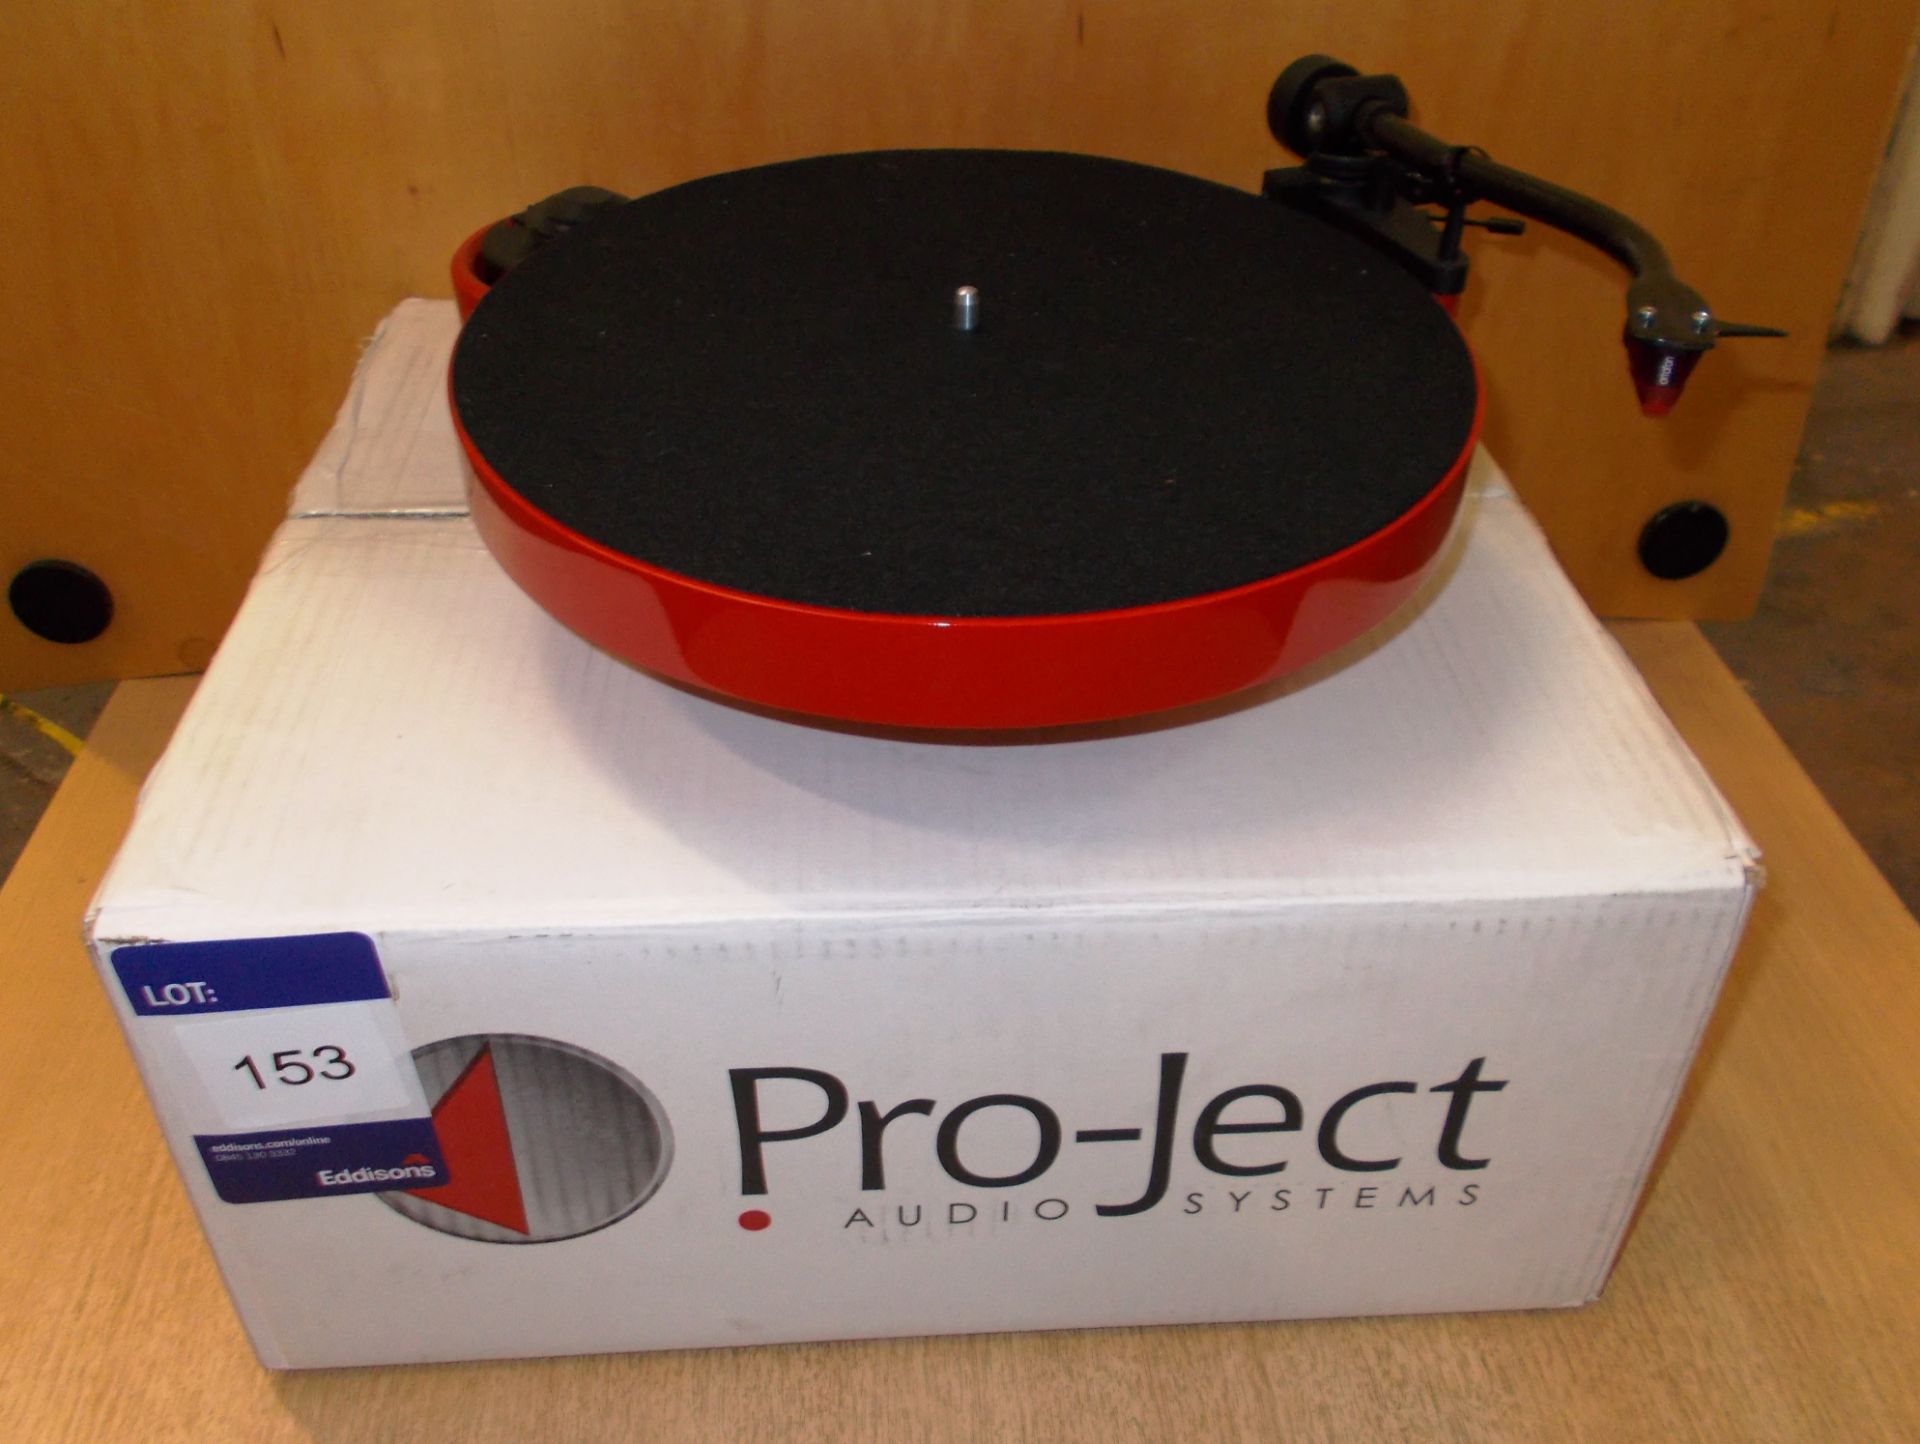 Pro-Ject RPM 1 Carbon DC Turntable, red (on display) – RRP £375